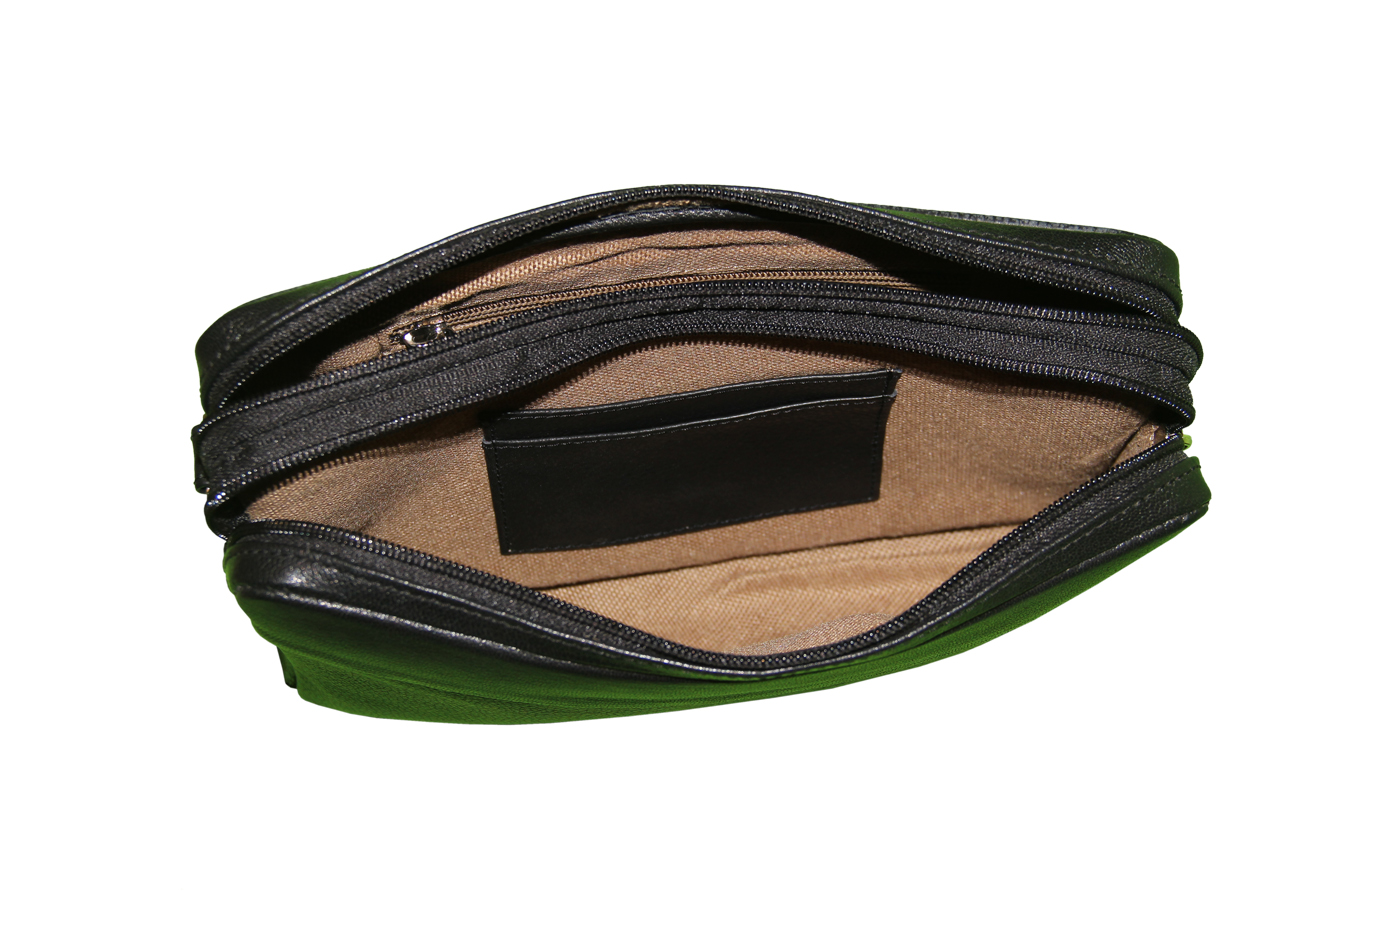 P20-Fernando-Men's Bag And Travel Pouch in Genuine Leather - Black